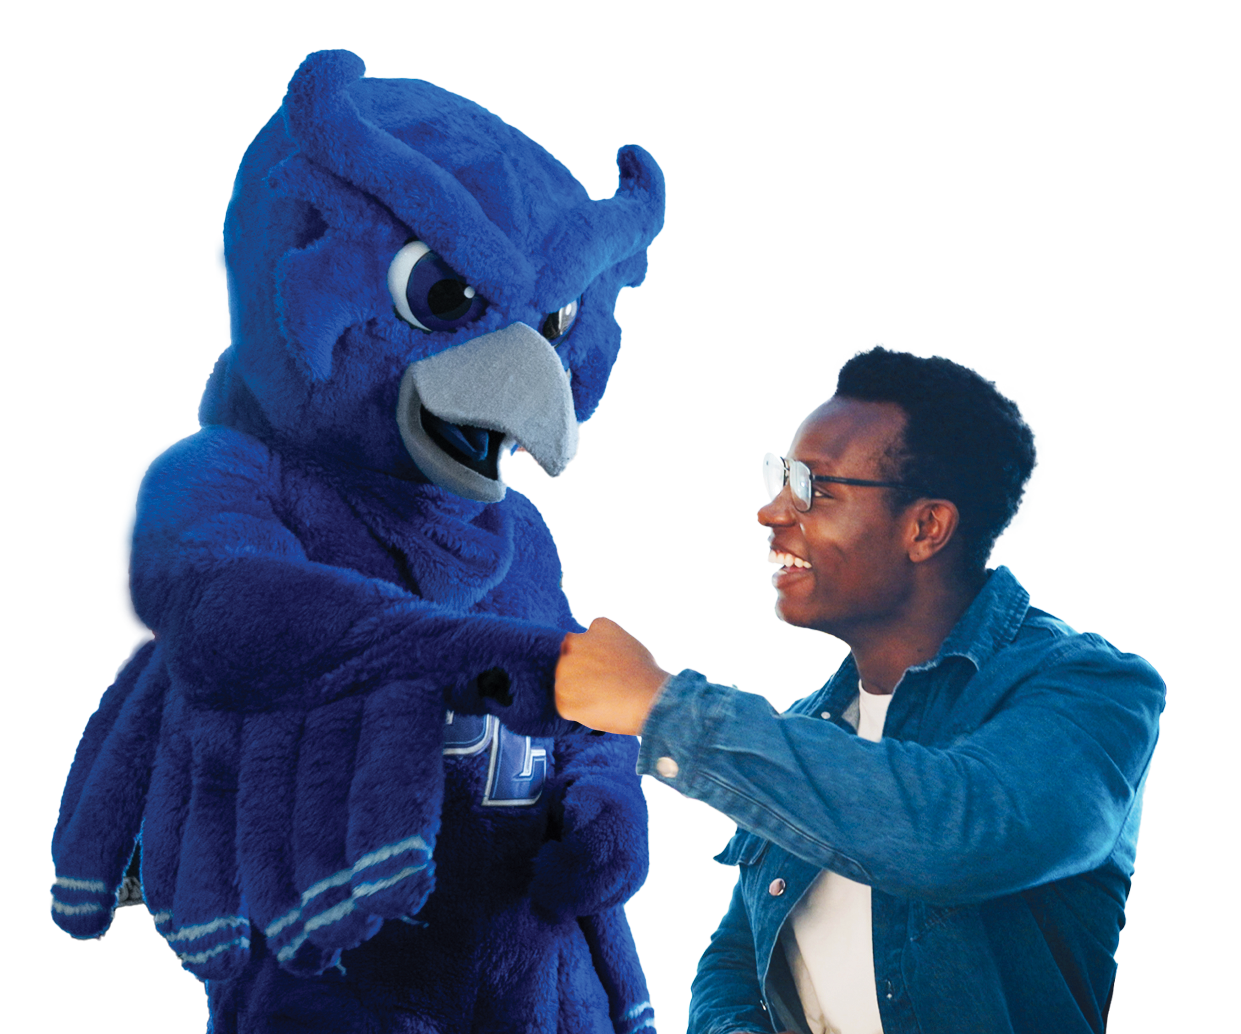 Student fist-bumping the Owl mascot